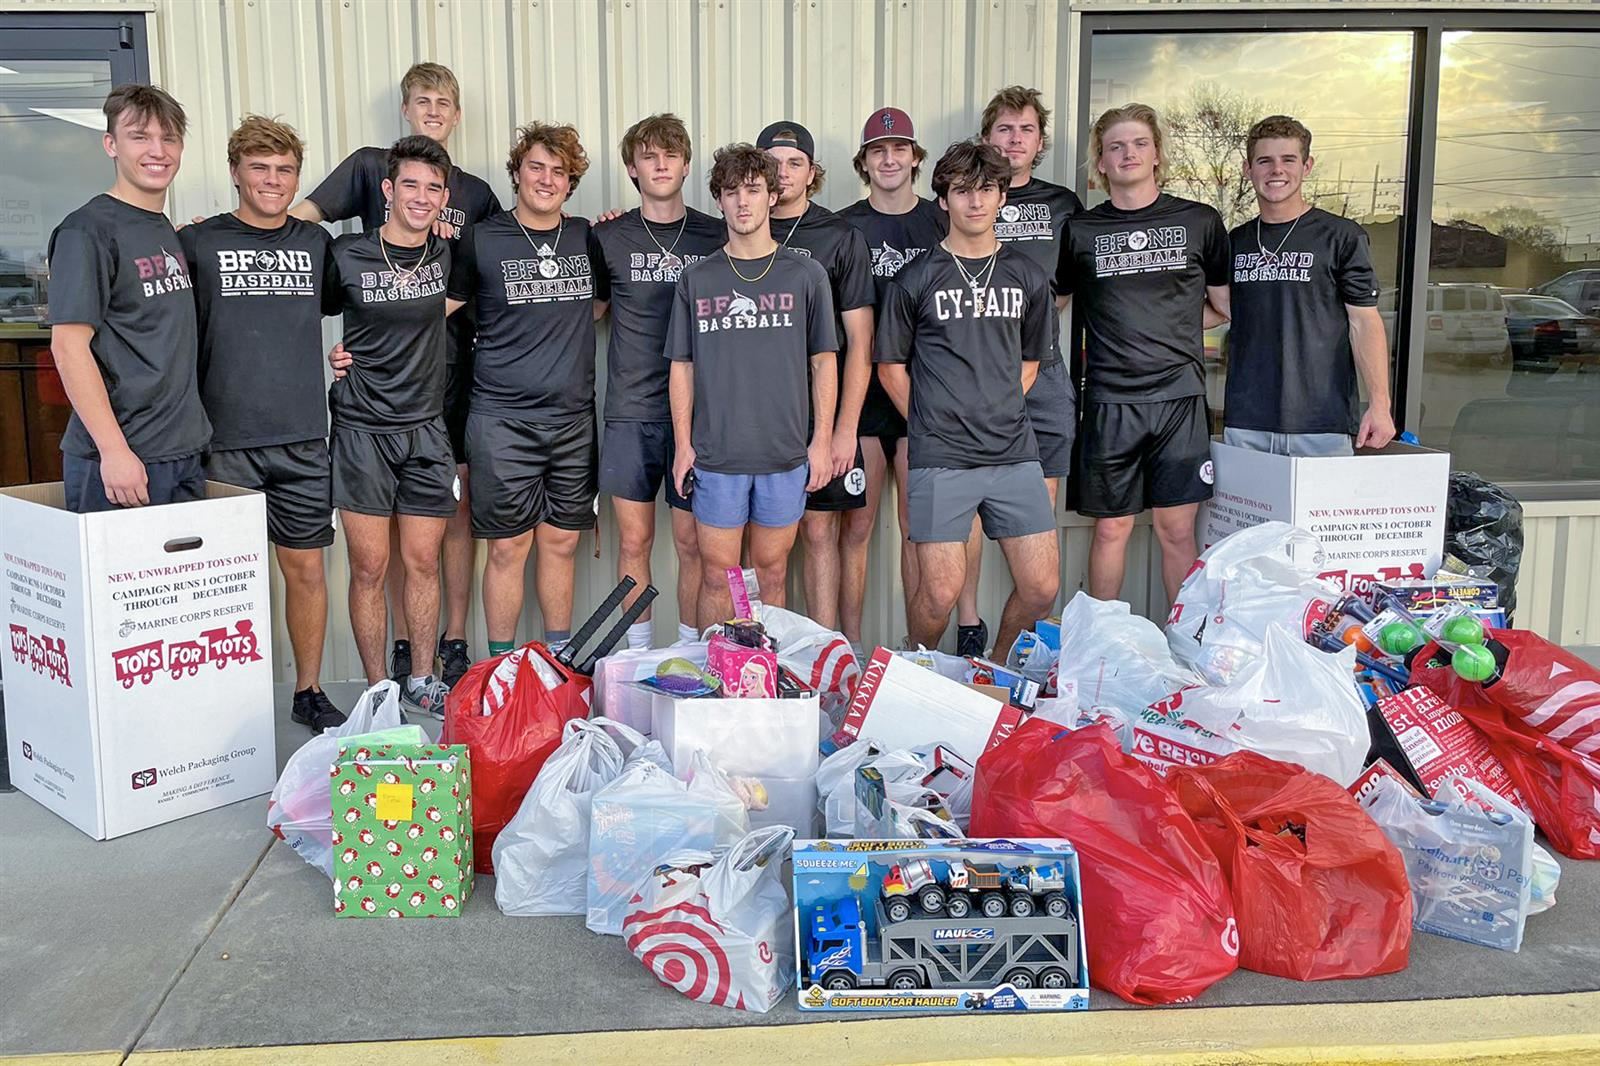 Members of the Cy-Fair High School baseball team pose with donations they collected for Toys for Tots.